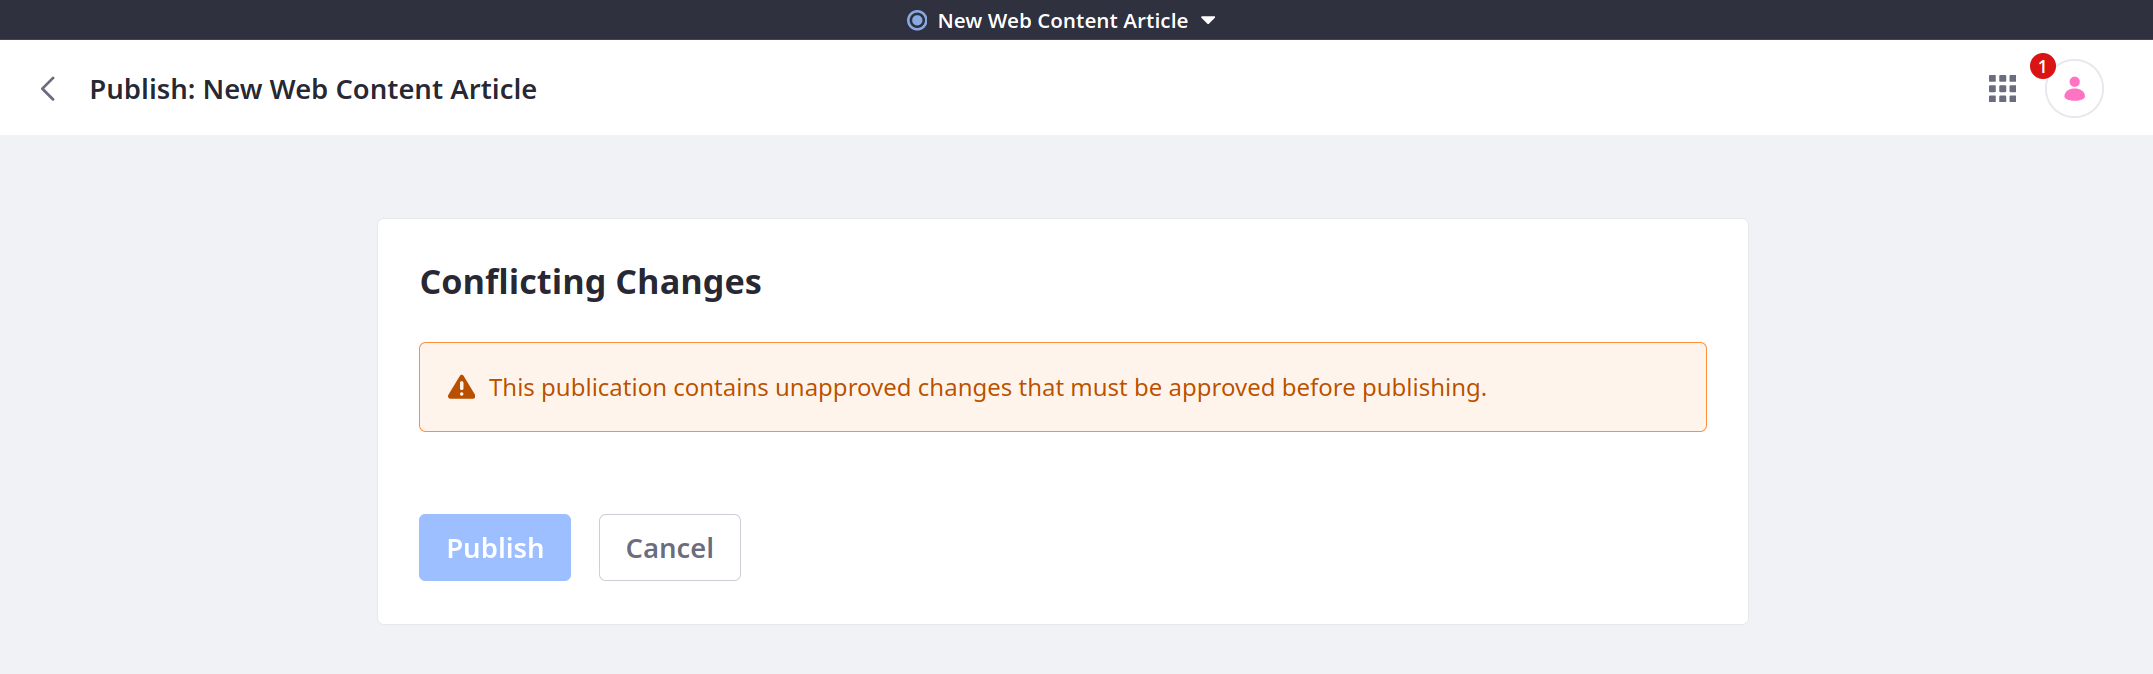 Attempting to publish unapproved changes displays an error message.